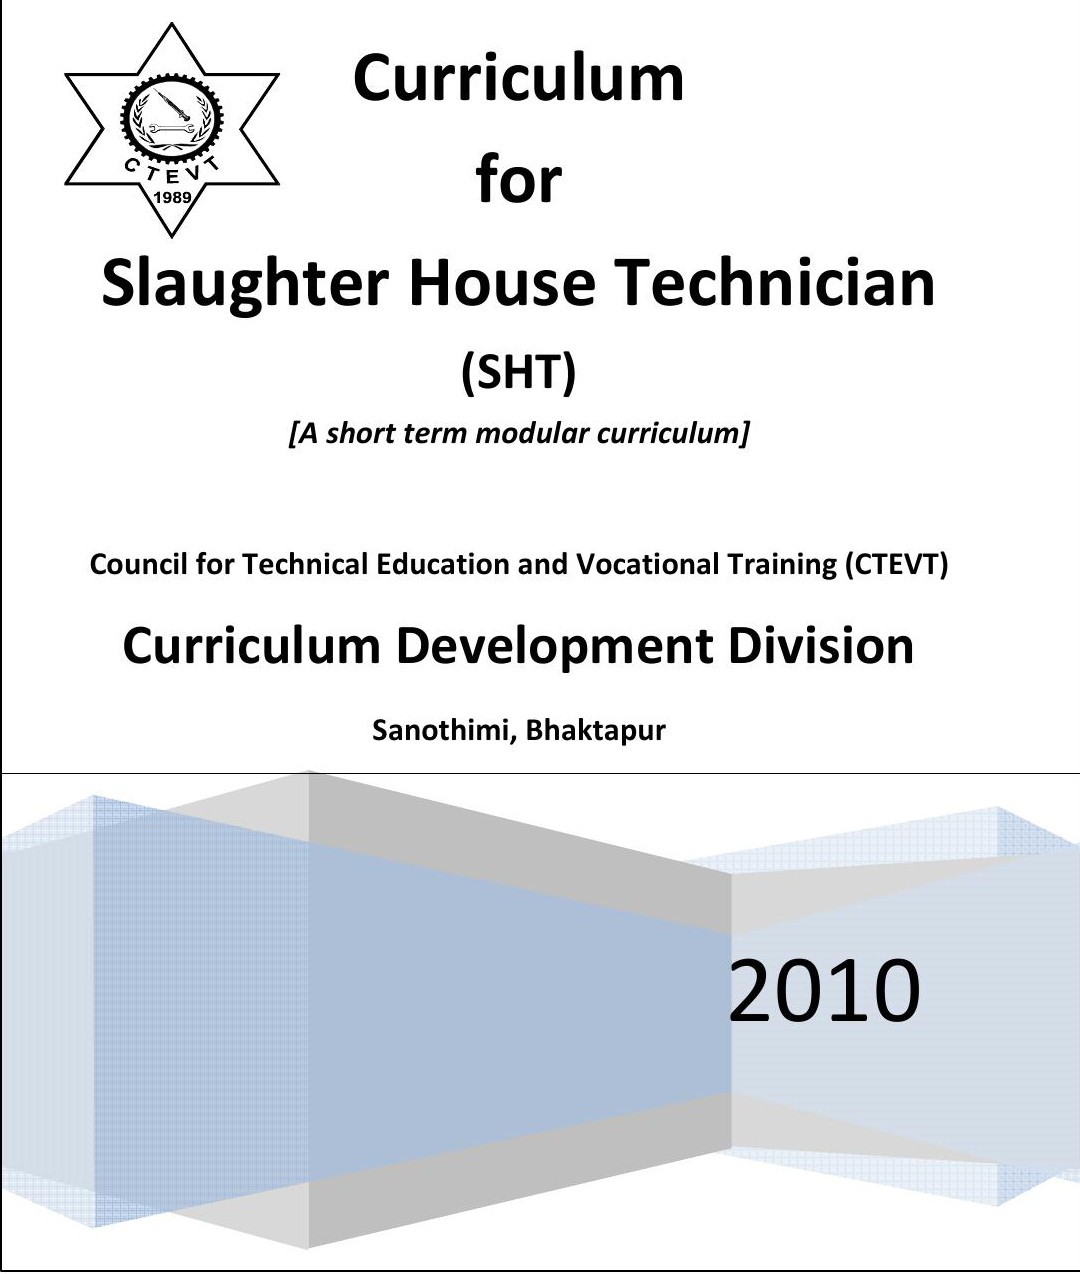 Slaughter house technician, 2010